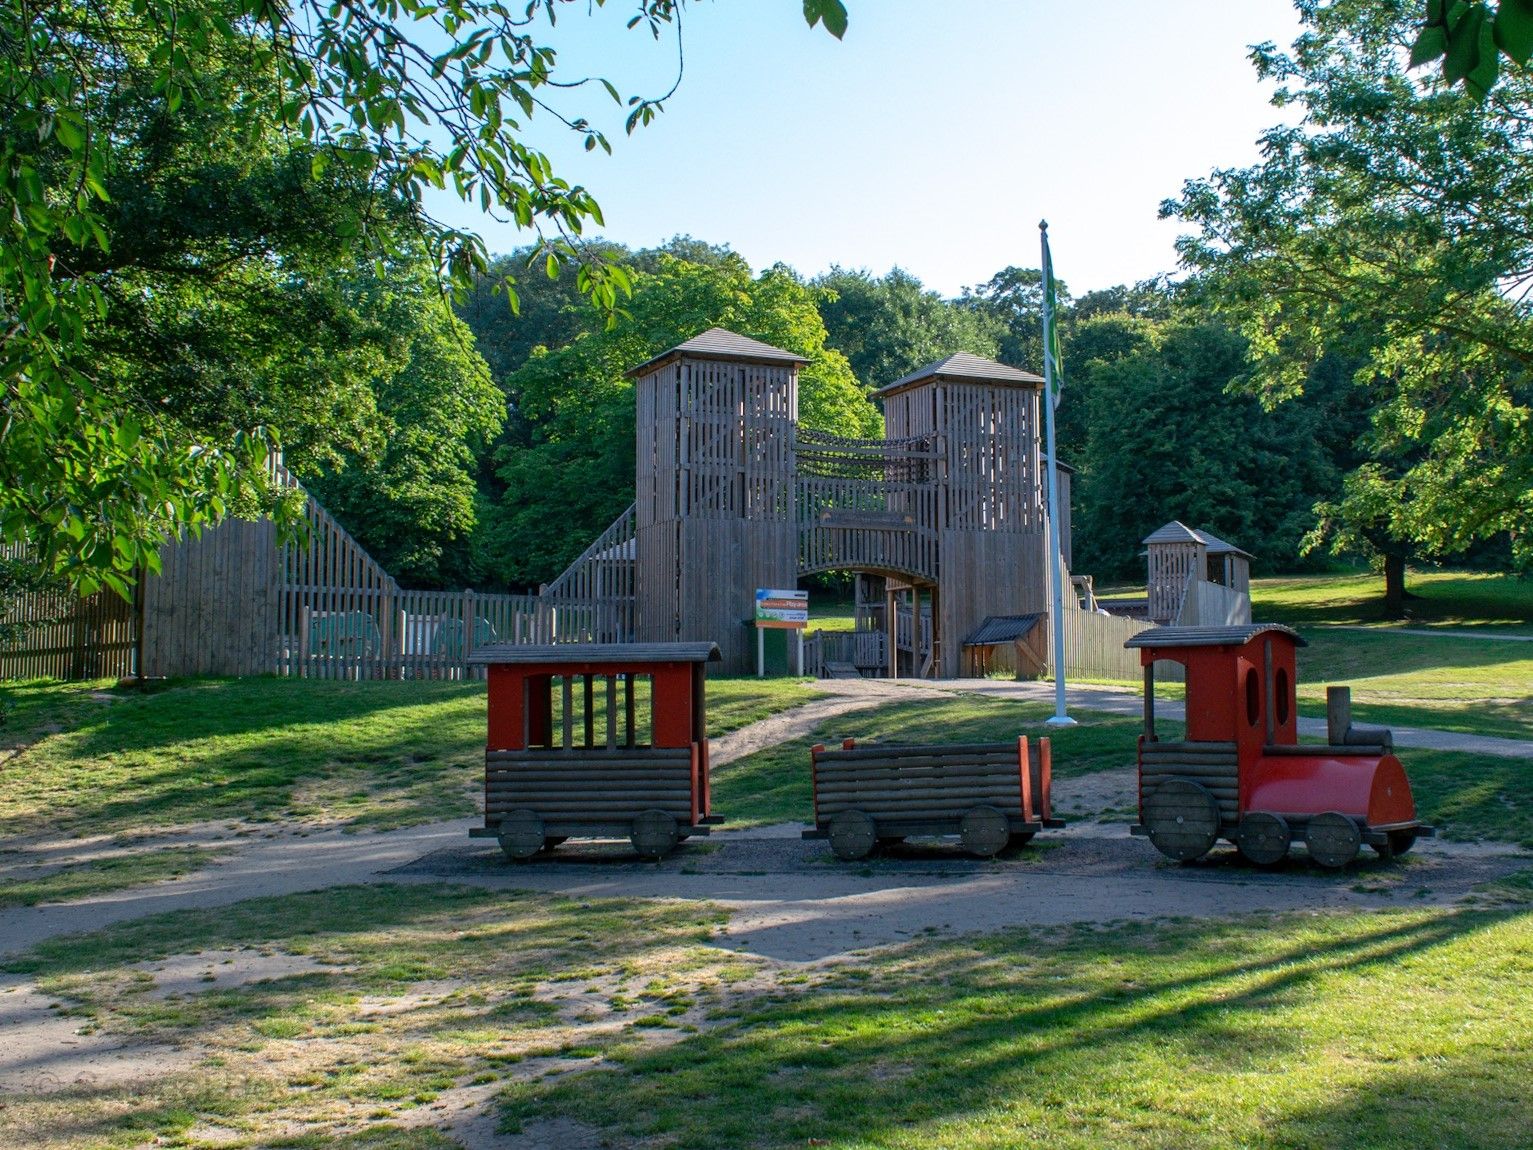 The play fort and wooden train at Cobtree Manor Park